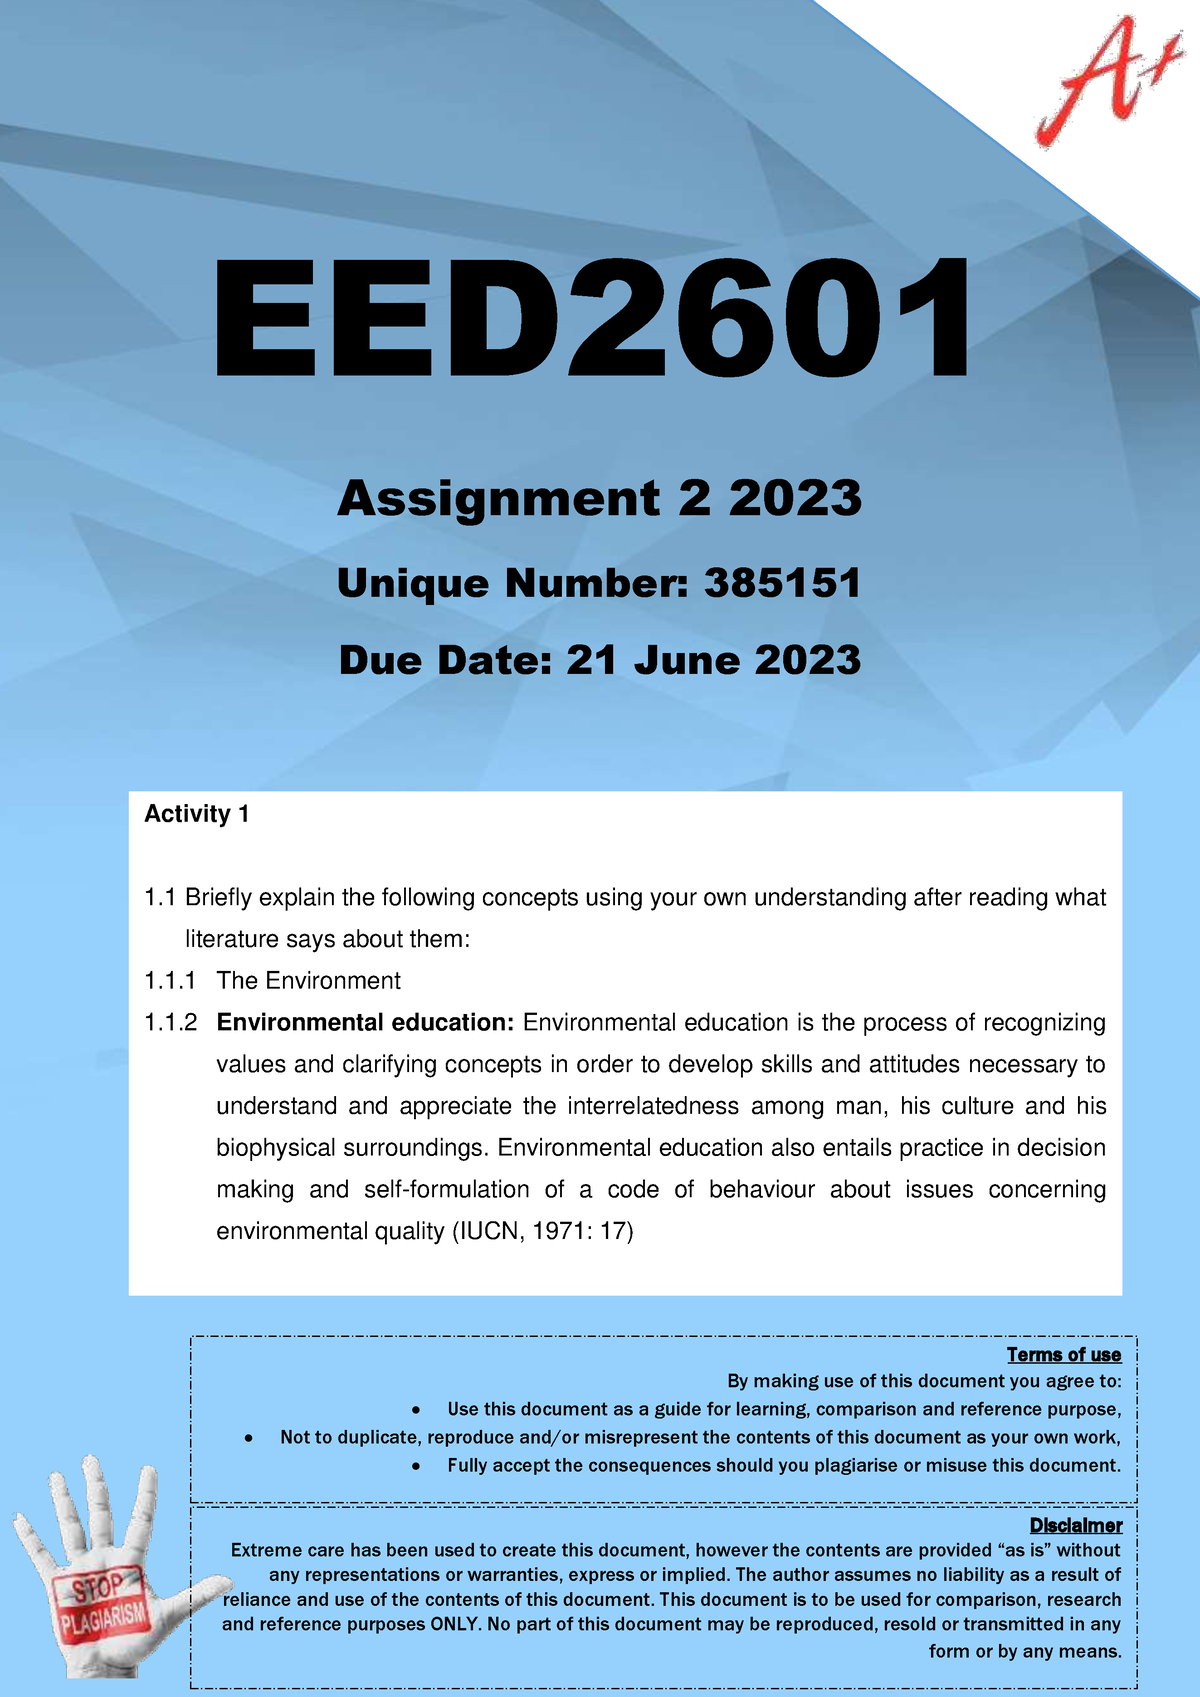 eed2601 assignment 2 answers 2023